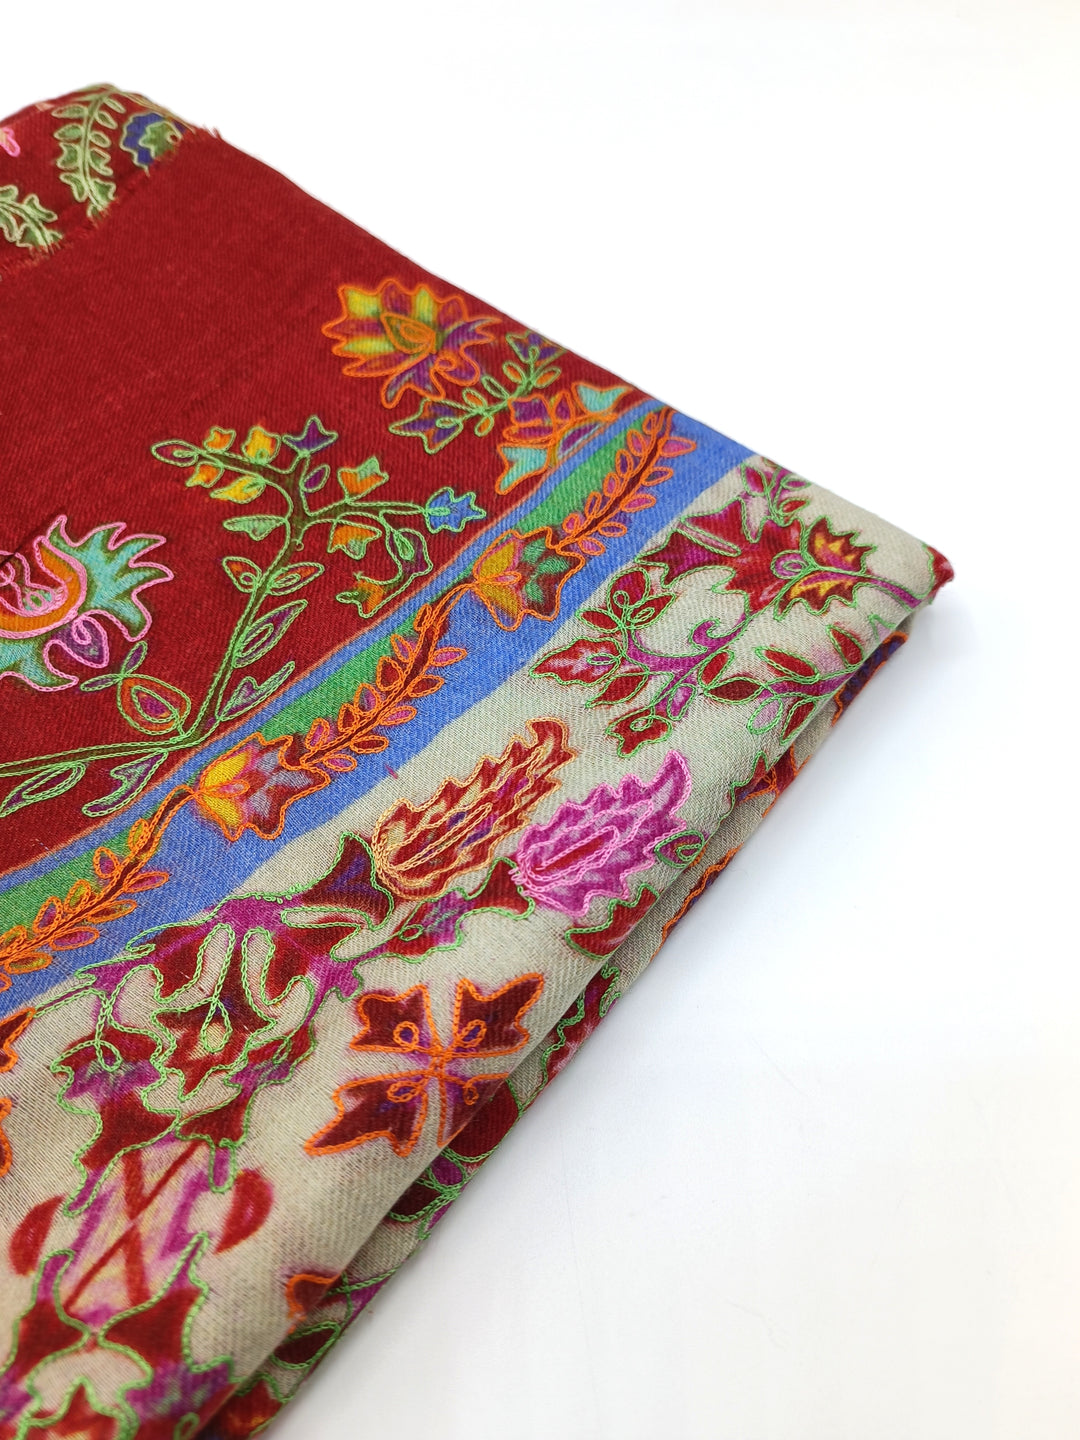 Premium Quality Red Maroon Multi Color  Embroidered Pashmina Cashmere Shawl